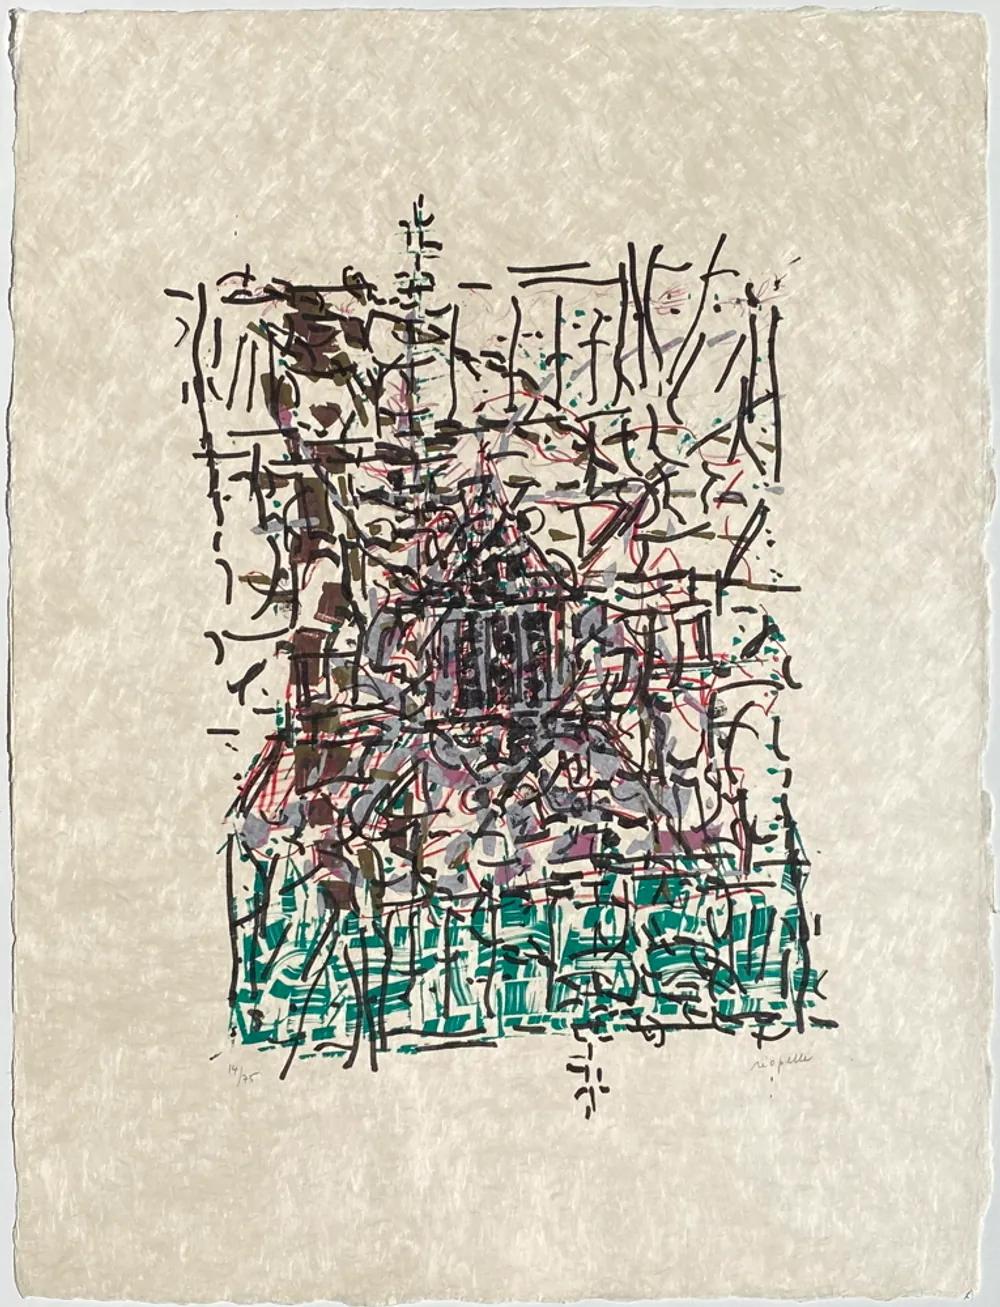 Abstract Print Jean-Paul Riopelle - Clocher caché